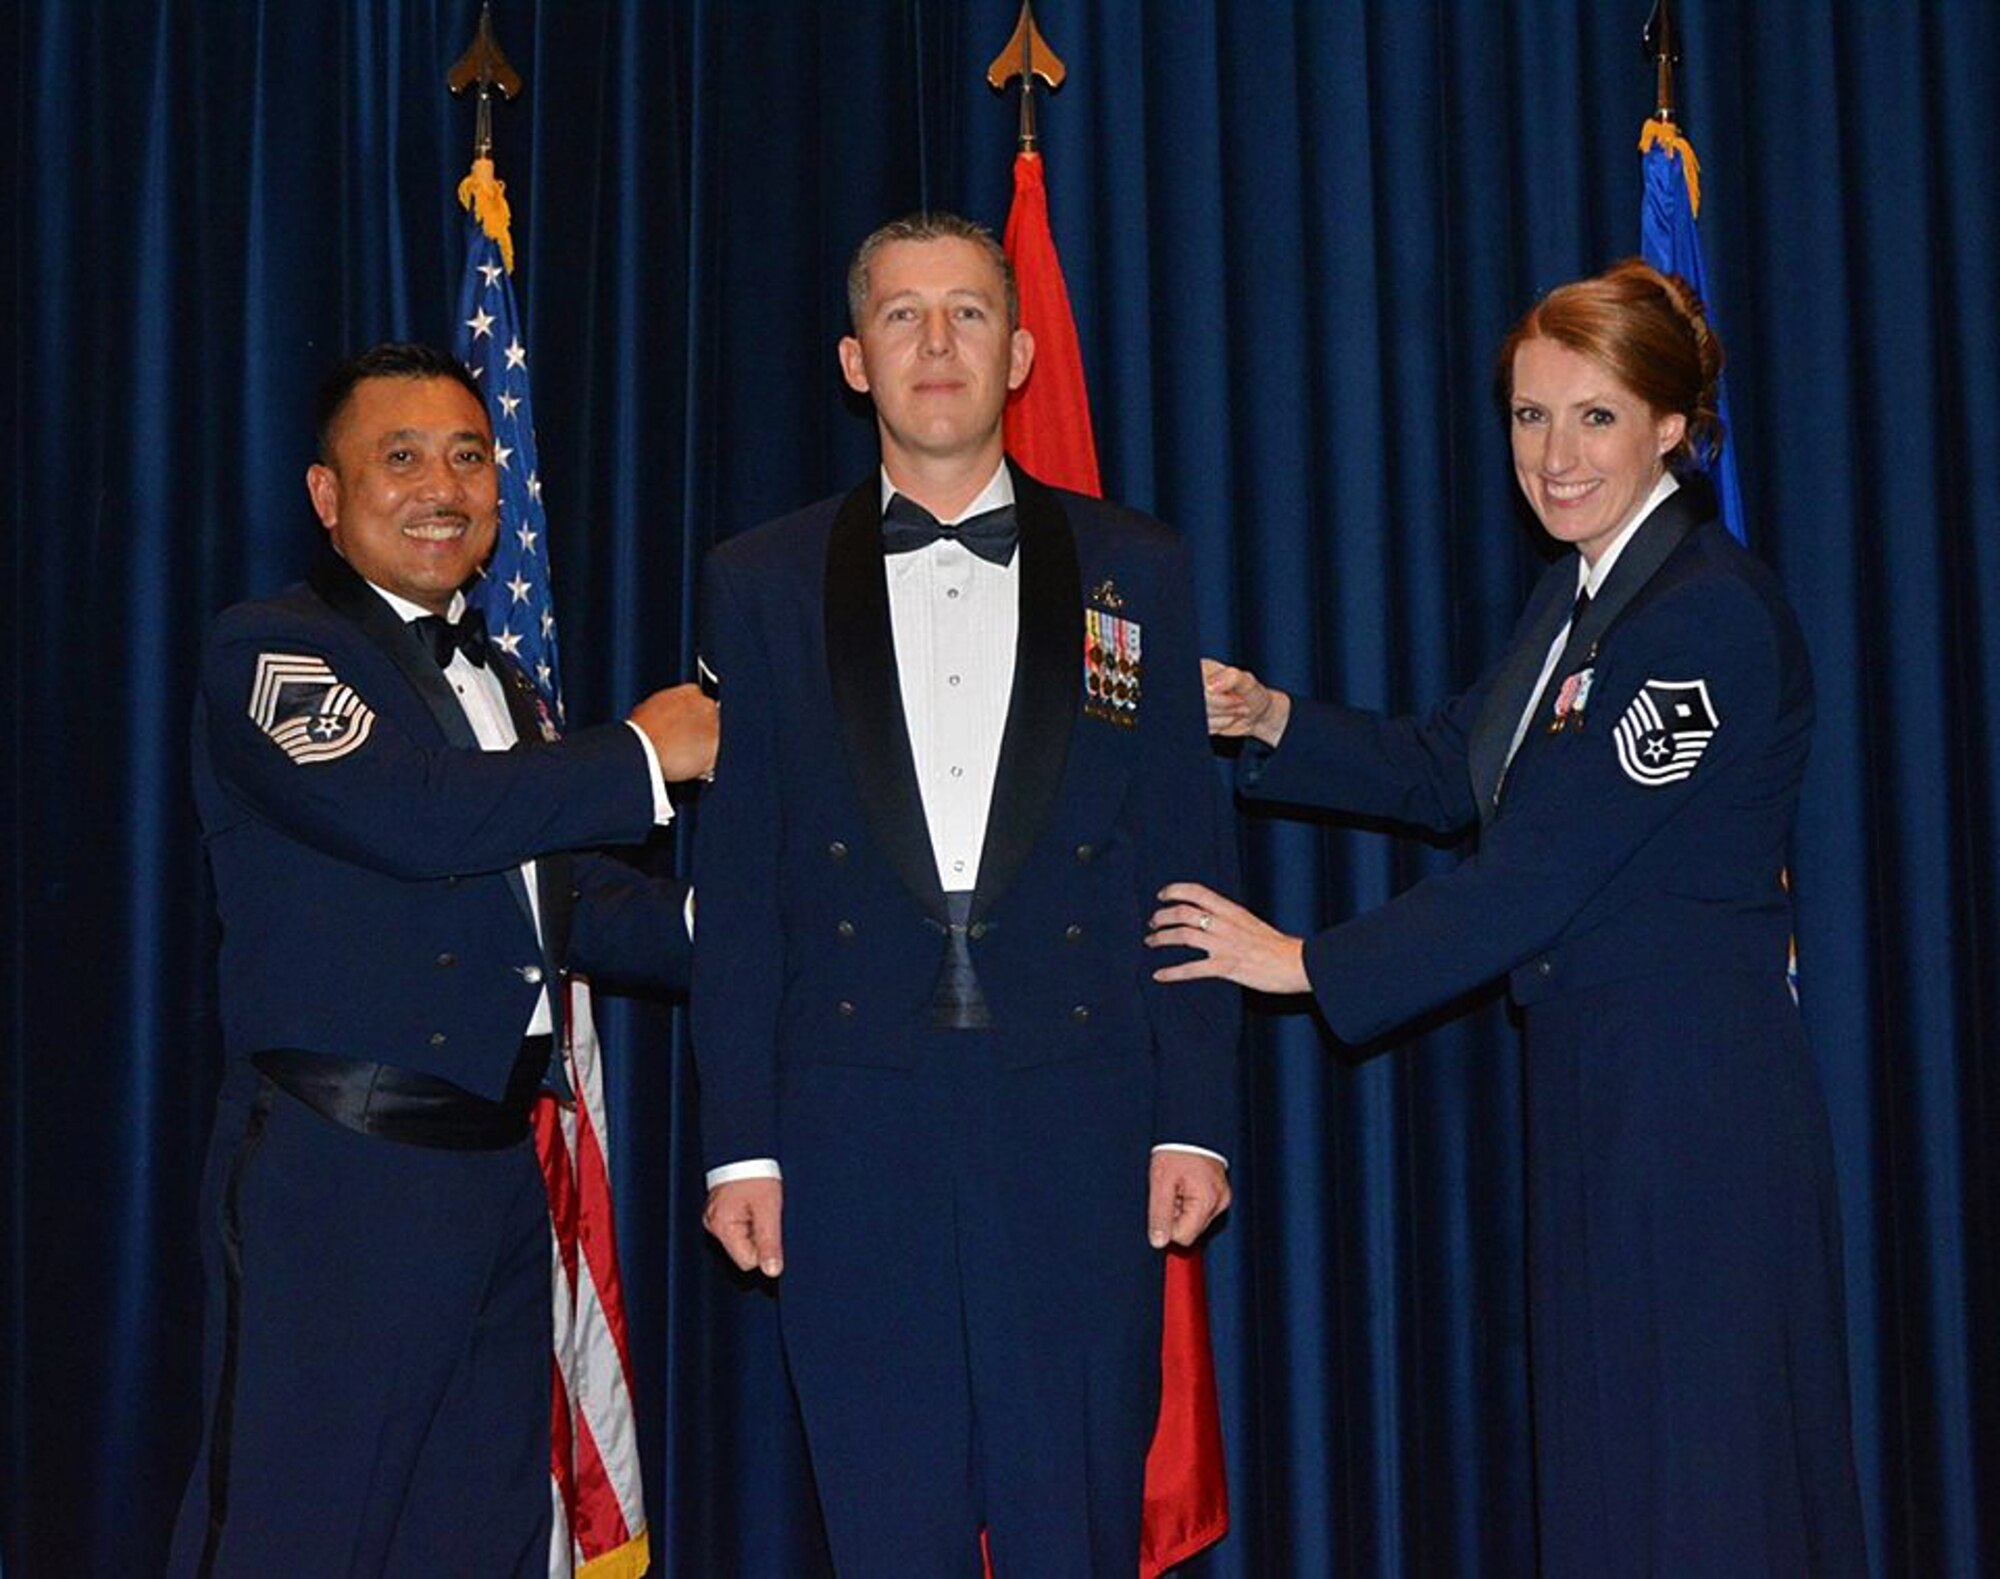 Master Sgt. Chris Rekrut, 728th Air Mobility Squadron Quality Assurance superintendent, is “tacked on” by Chief Master Sgt. Phillip Gawan, 728th superintendent, and his wife, Air Force Reserve Master Sgt. Corrine Rekrut. Rekrut, was recently promoted by means of the Stripes for Exceptional Performers program for his sustained exceptional performance at work and his involvement in the community. (Photo by Carla Bigger)